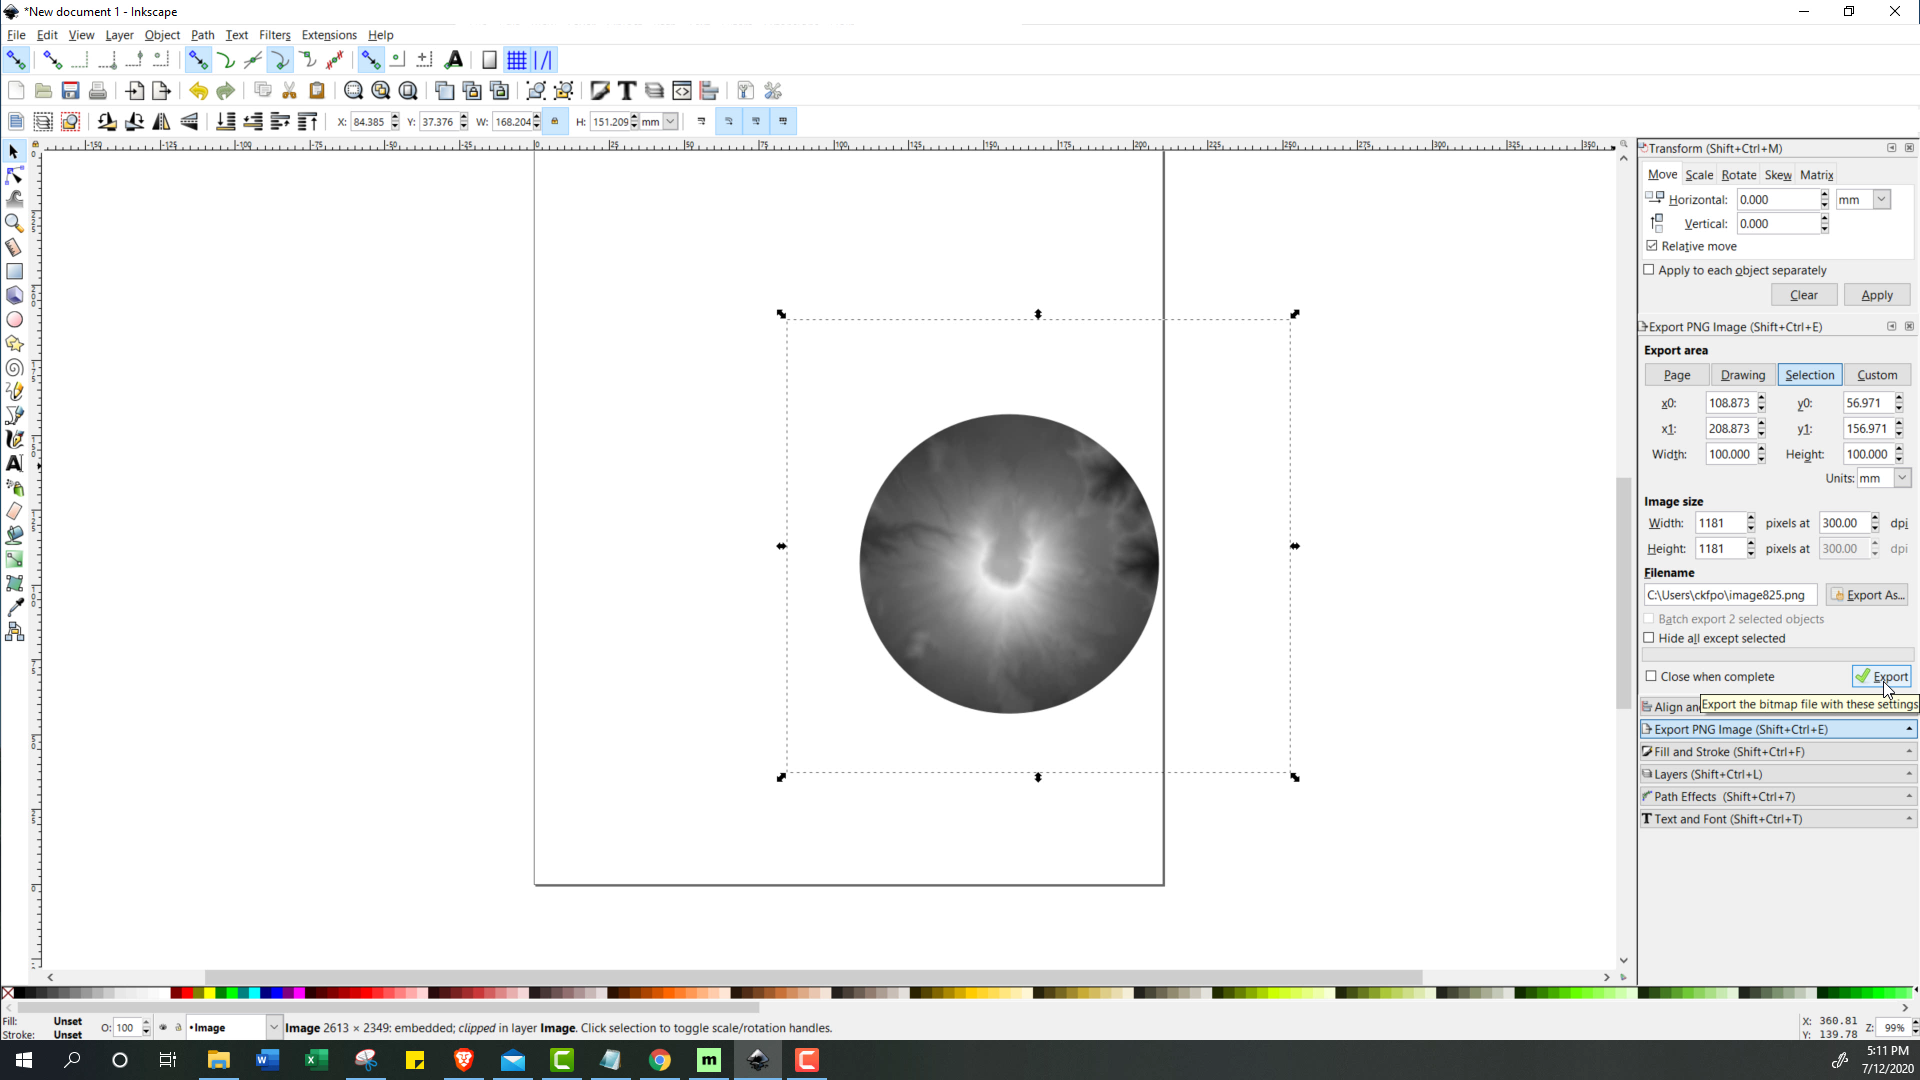 Inkscape3 - Trim and export image.png